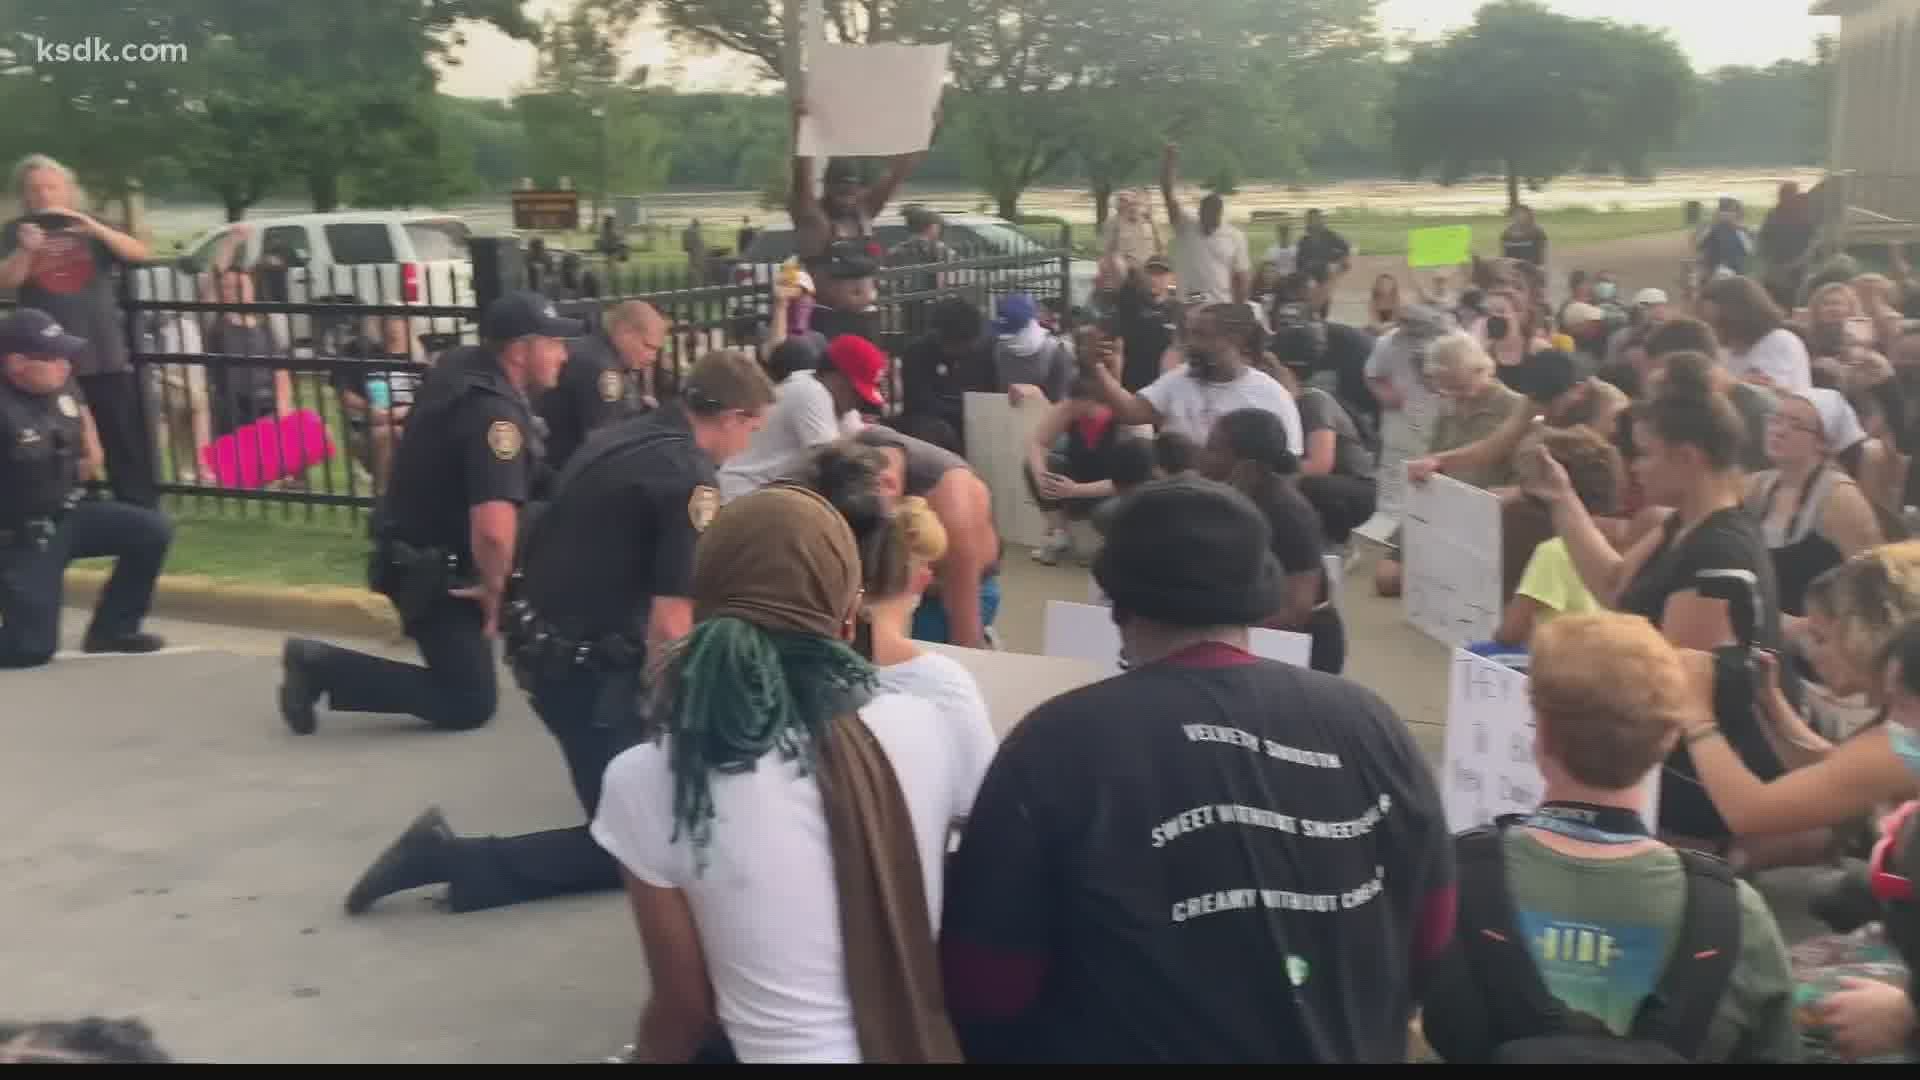 Police took a knee with some of the protesters during a march in St. Charles.